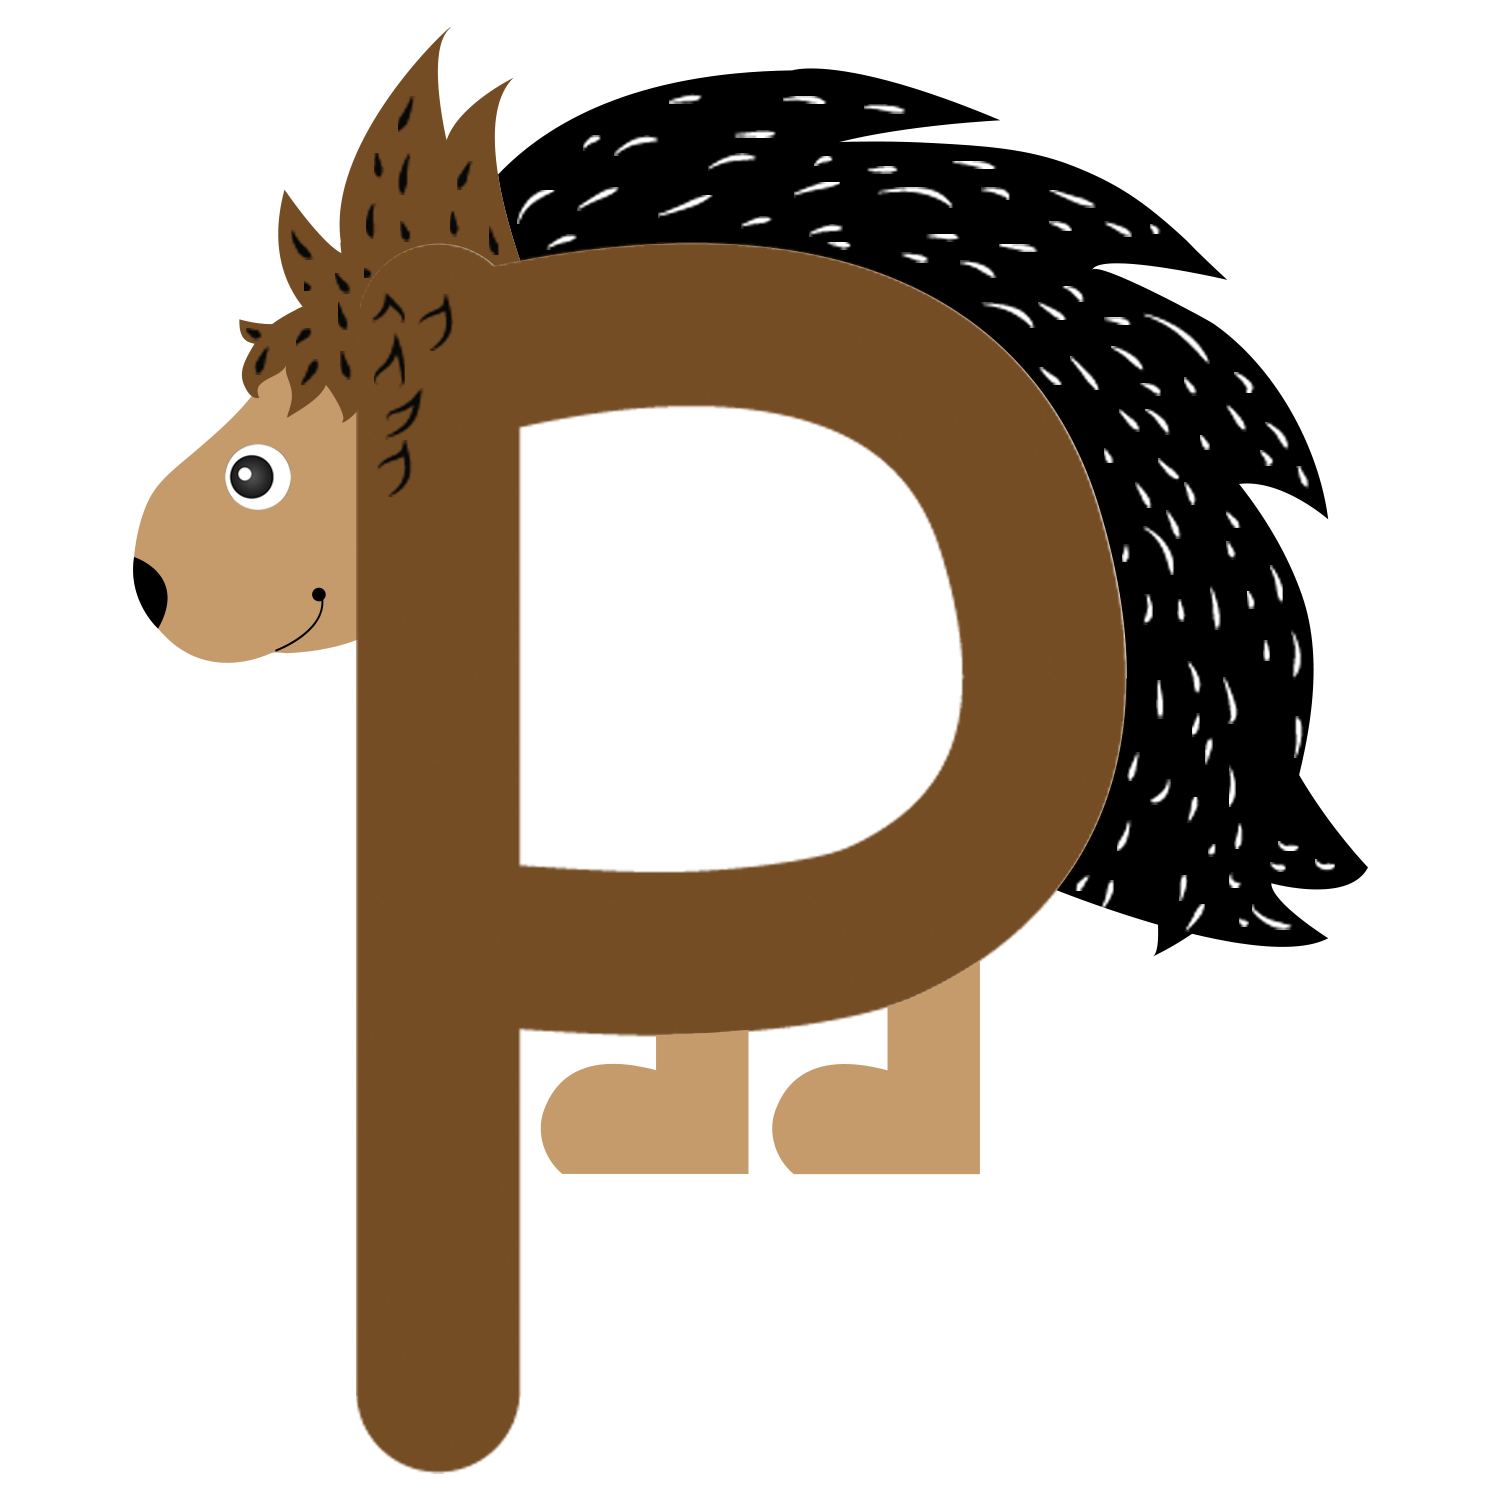 P is for parror